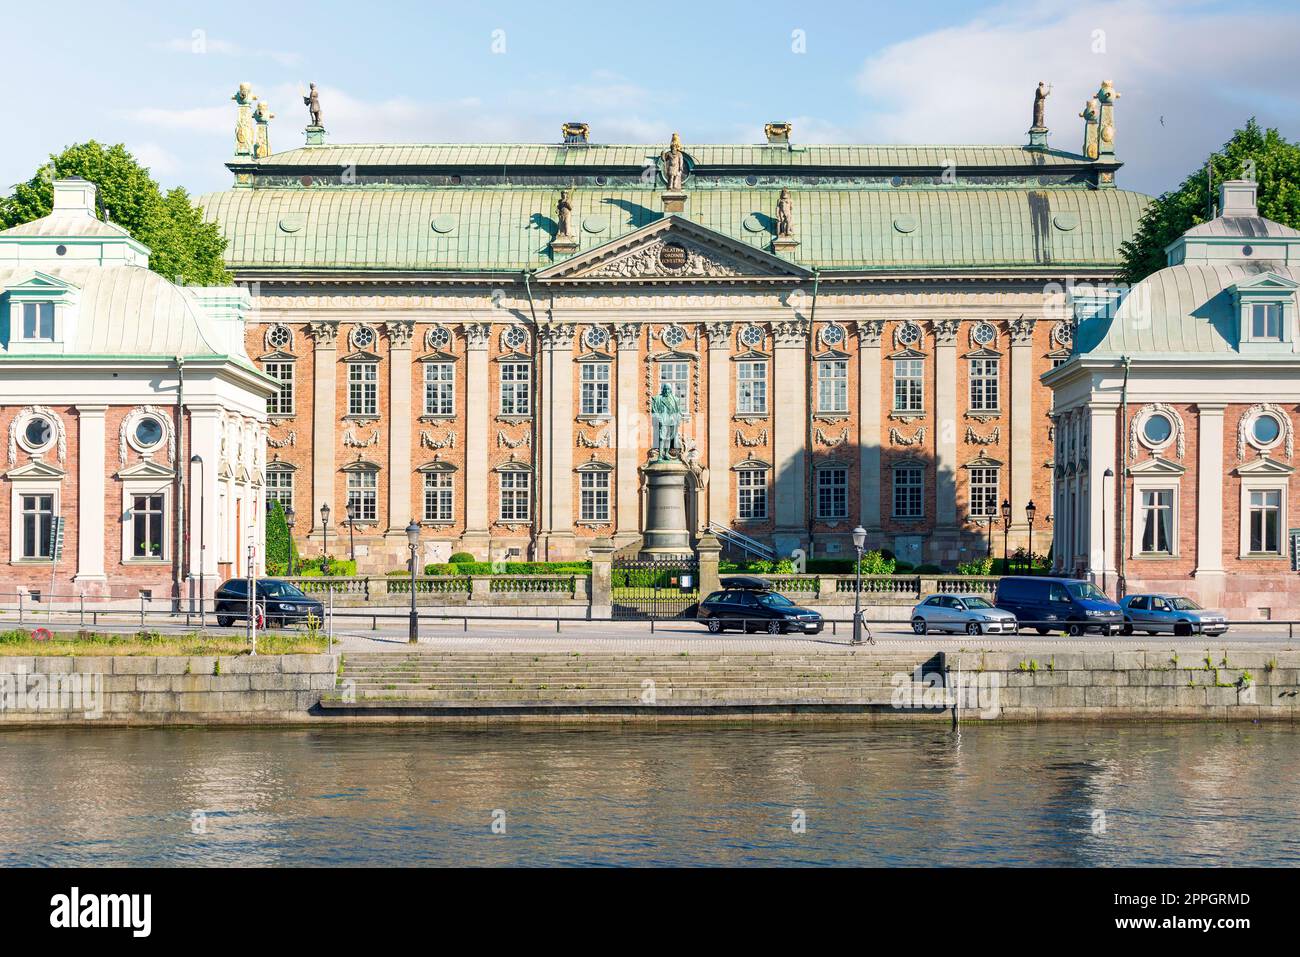 Riddarhuset, House of Nobility or House of Knights, located on the old town, Gamla Stan, Stockholm, Sweden Stock Photo